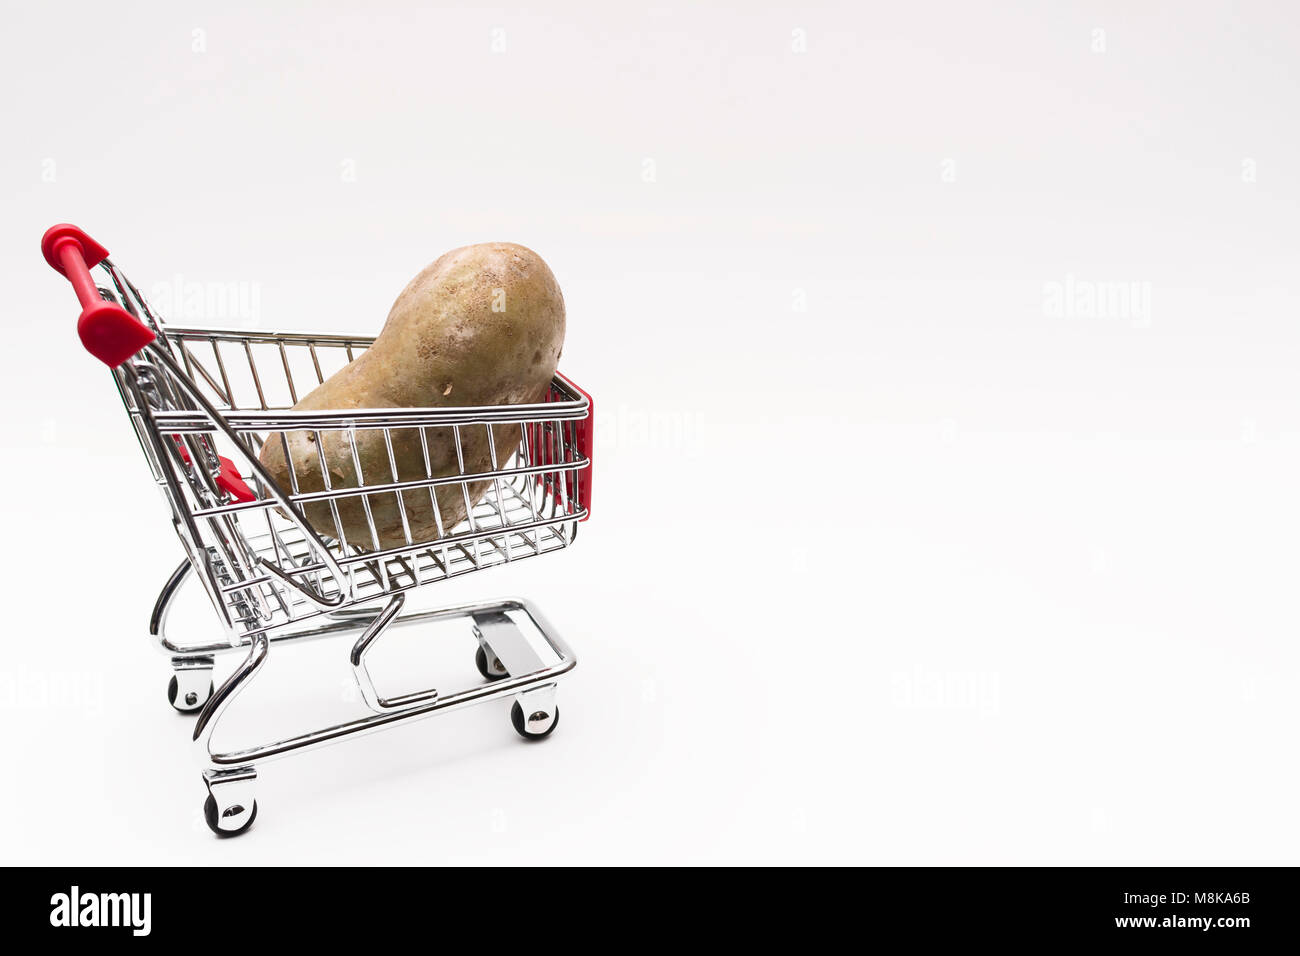 Buying a potatoes from supermarket, Potato in shopping cart, shoping cart isolated on white background Stock Photo